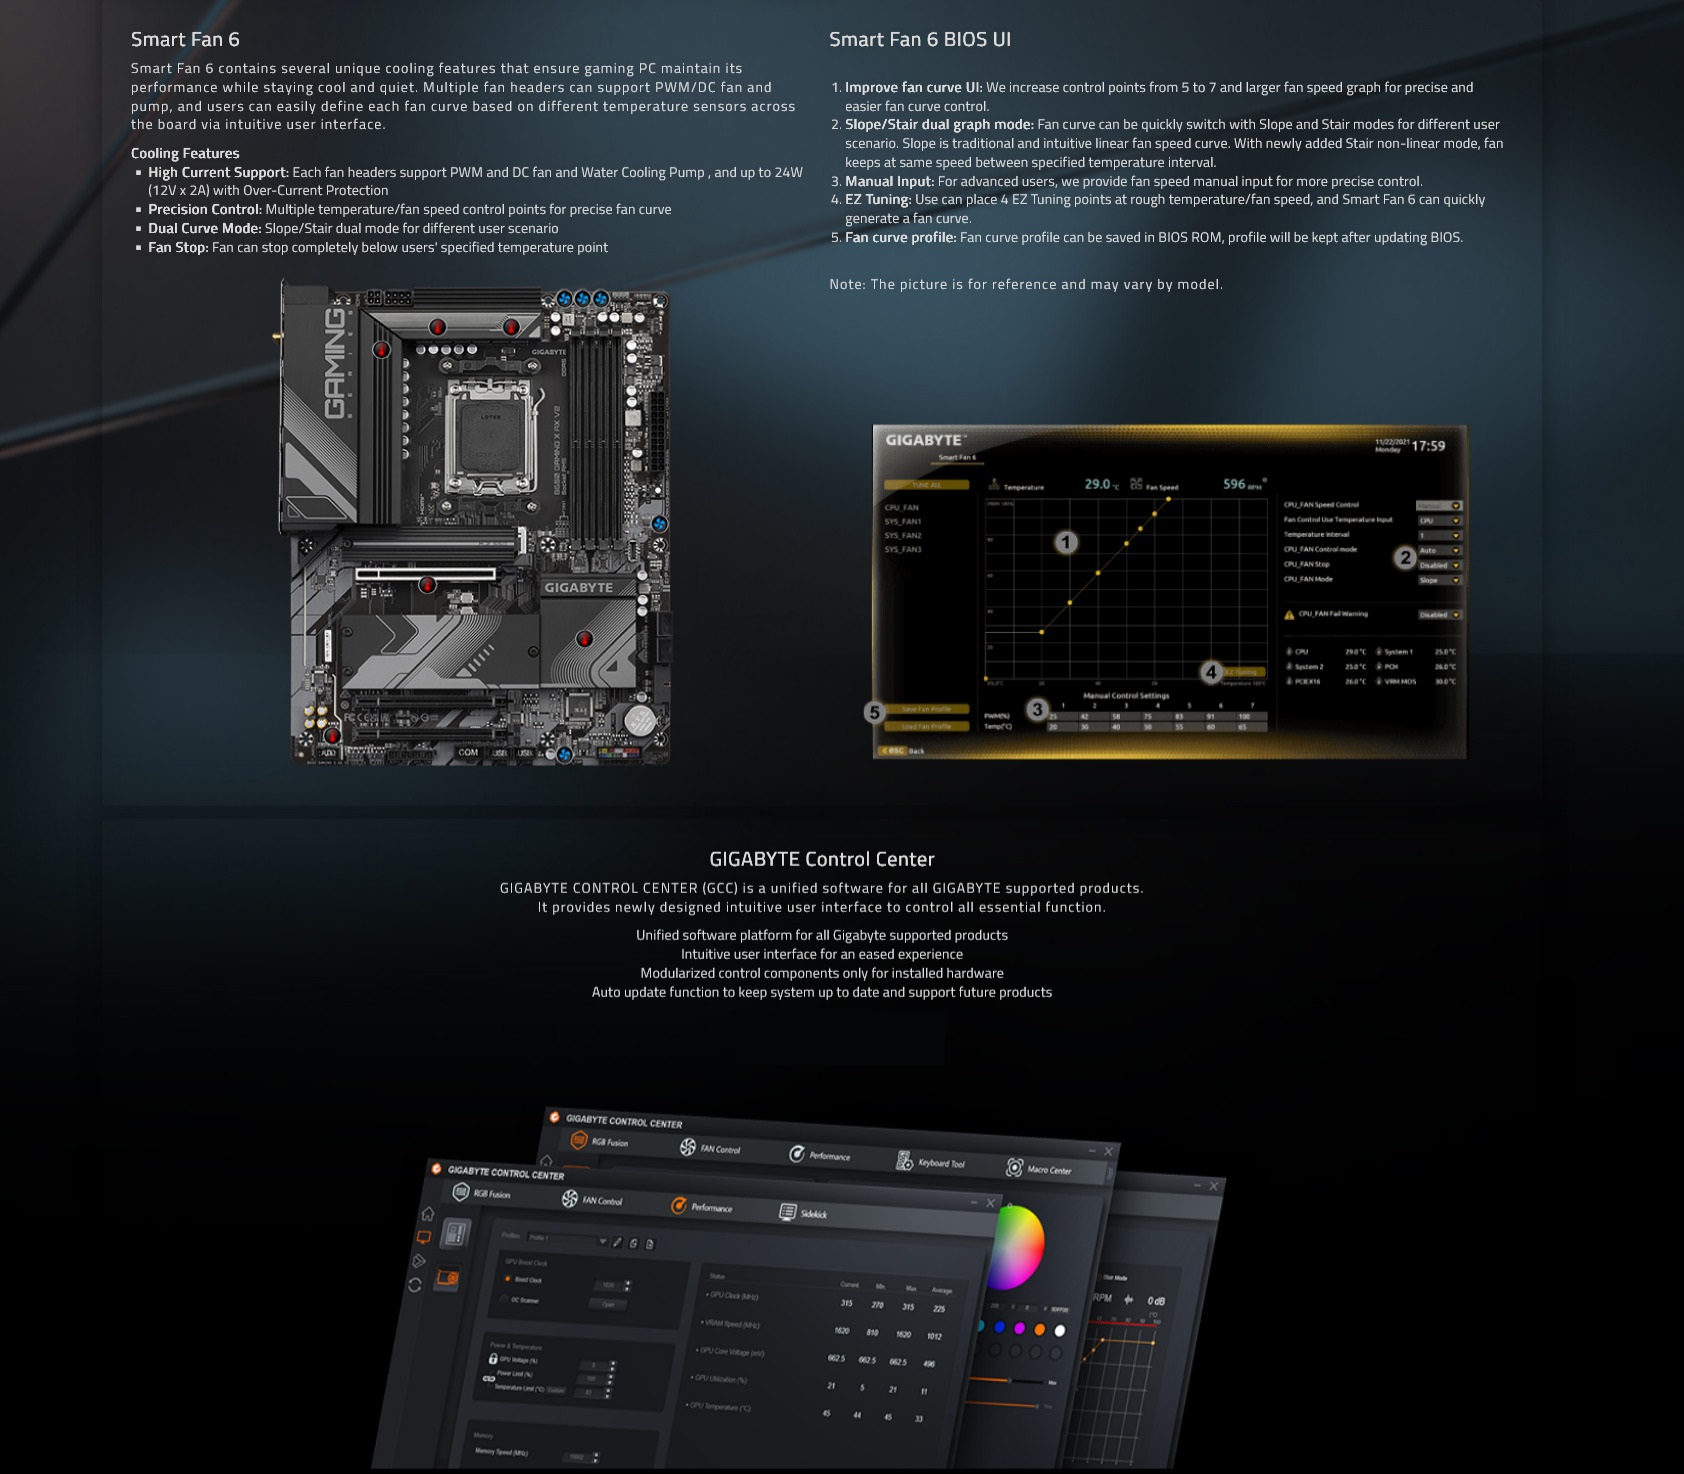 A large marketing image providing additional information about the product Gigabyte B650 Gaming X AX AM5 ATX Desktop Motherboard - Additional alt info not provided